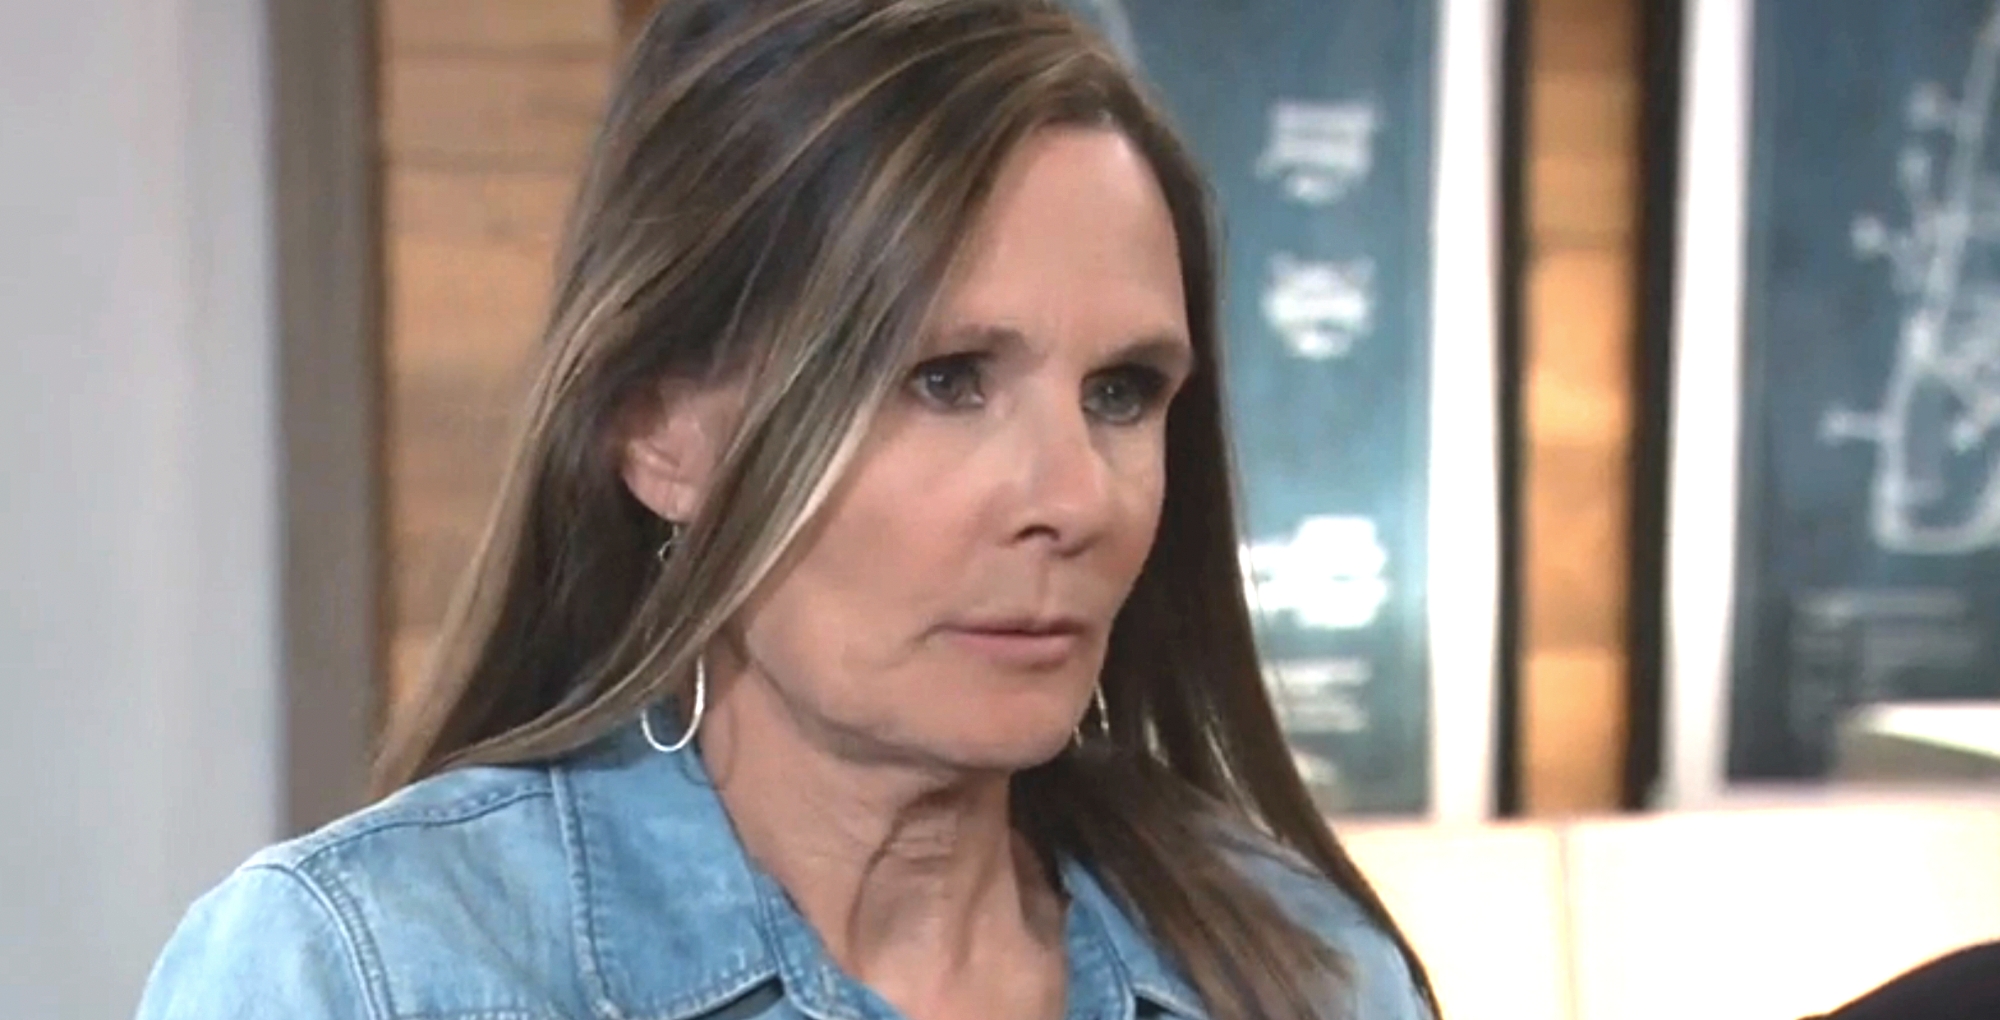 general hospital spoilers for march 20, 2023, has lucy coe ready to go